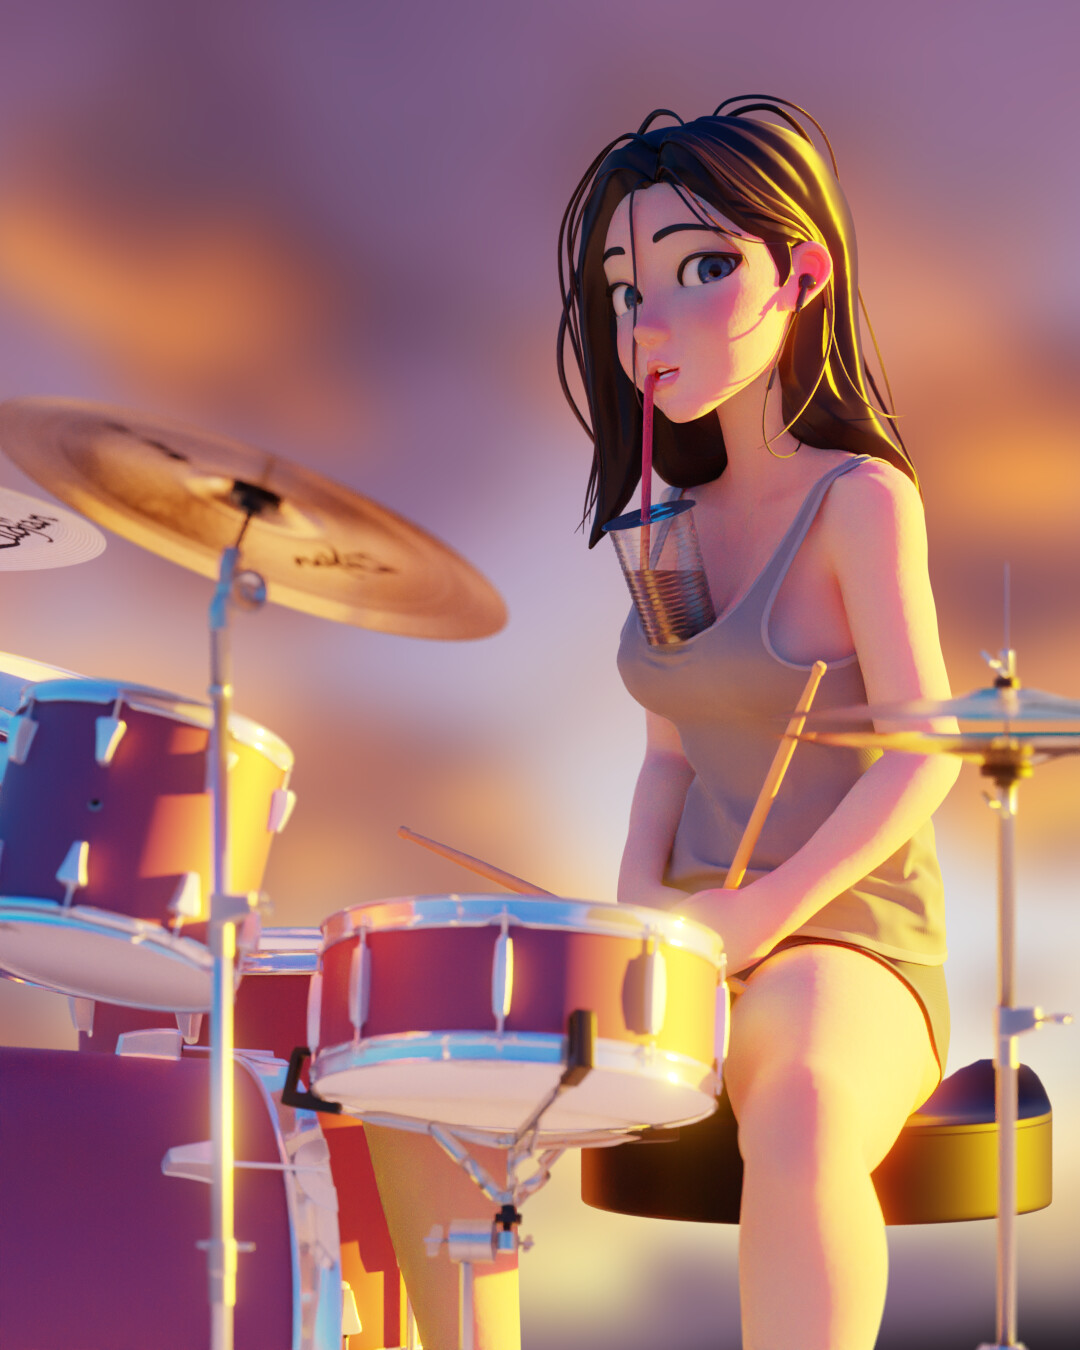 Anime Passionate Drummer Girl Art Canvas Art Poster And Wall Art Picture  Print Modern Family Bedroom Decor Posters 24x36inch(60x90cm) :  Amazon.co.uk: Home & Kitchen